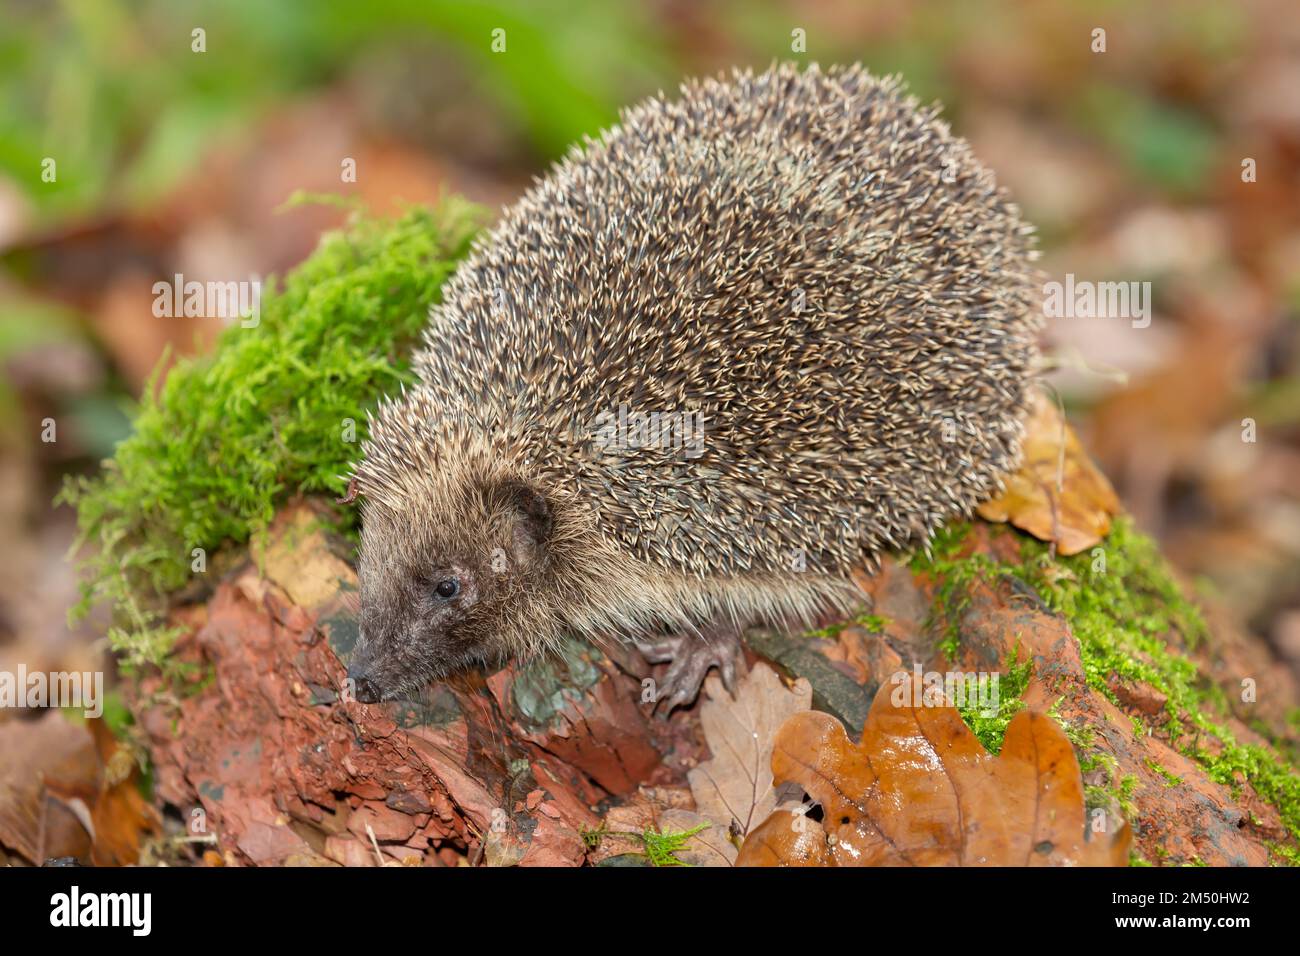 Hedgehog, Scientific name: Erinaceus europaeus. Close up of a large, wild hedgehog foraging in a garden with green moss and Autumn leaves.  Facing lef Stock Photo